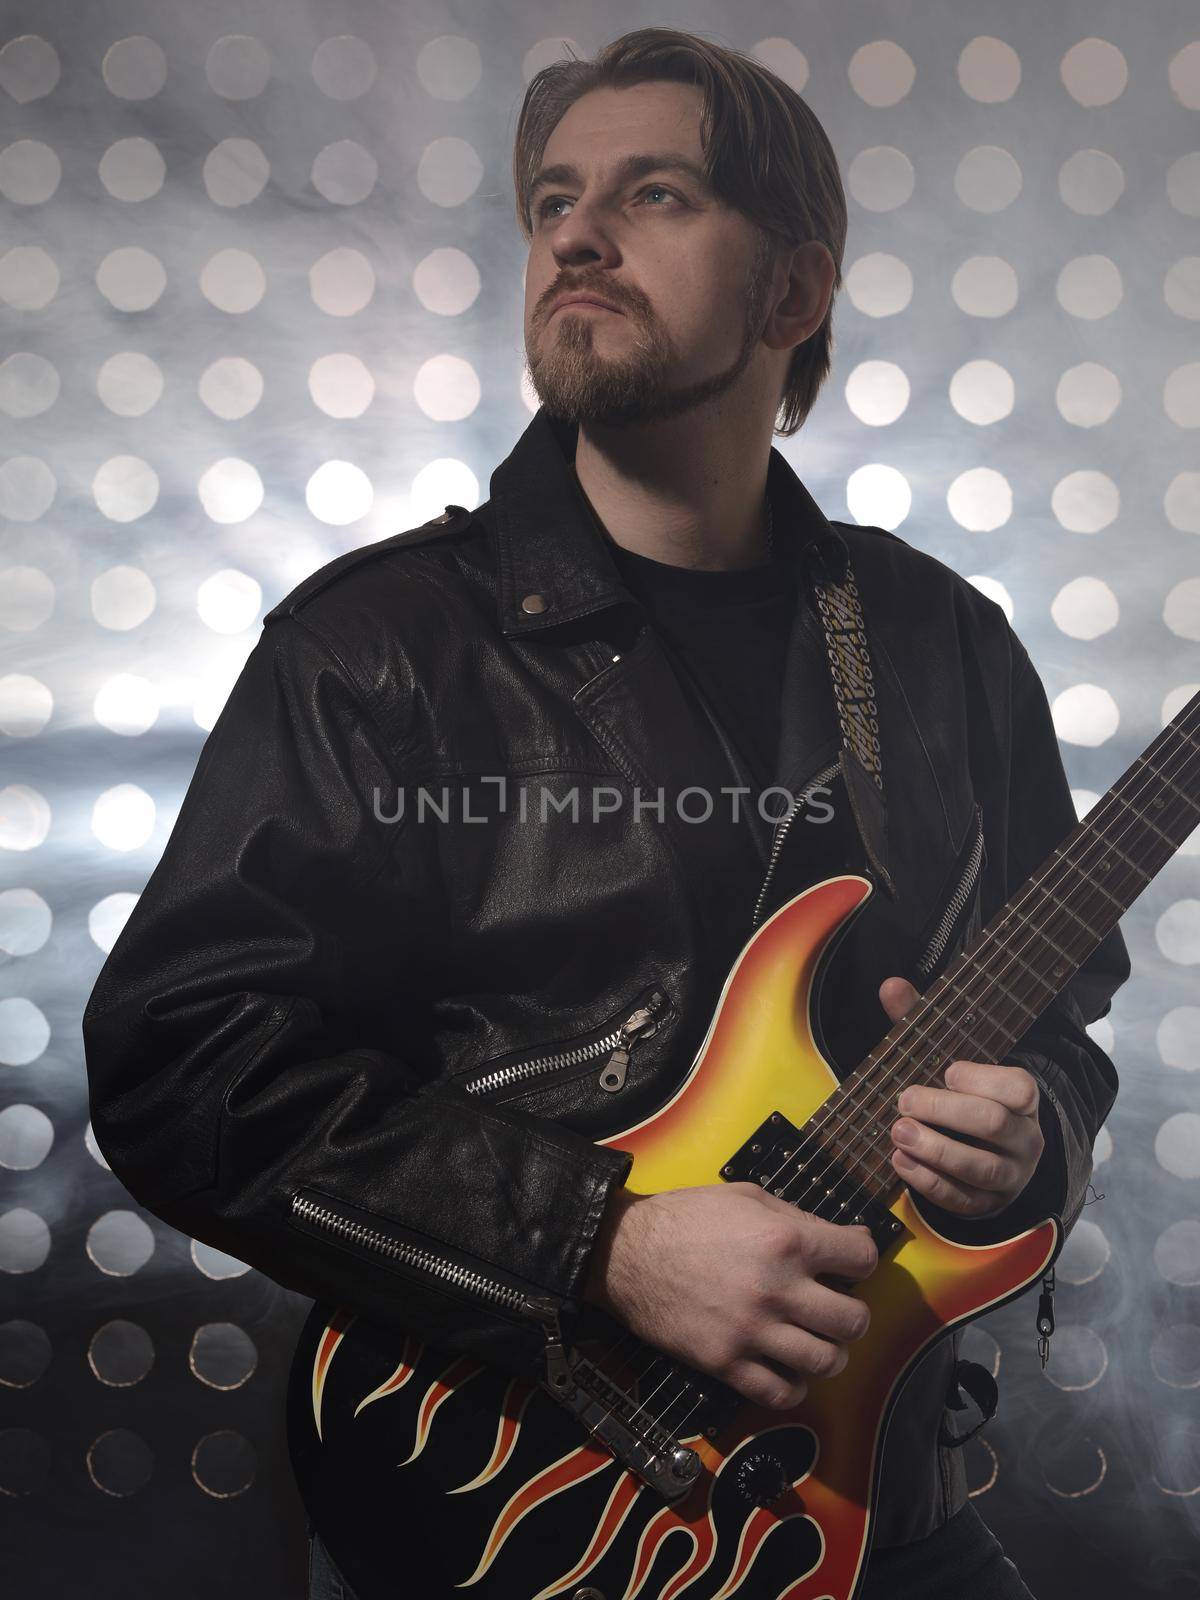 Attractive bearded man with glasses and black leather jackets plays guitar in smoke